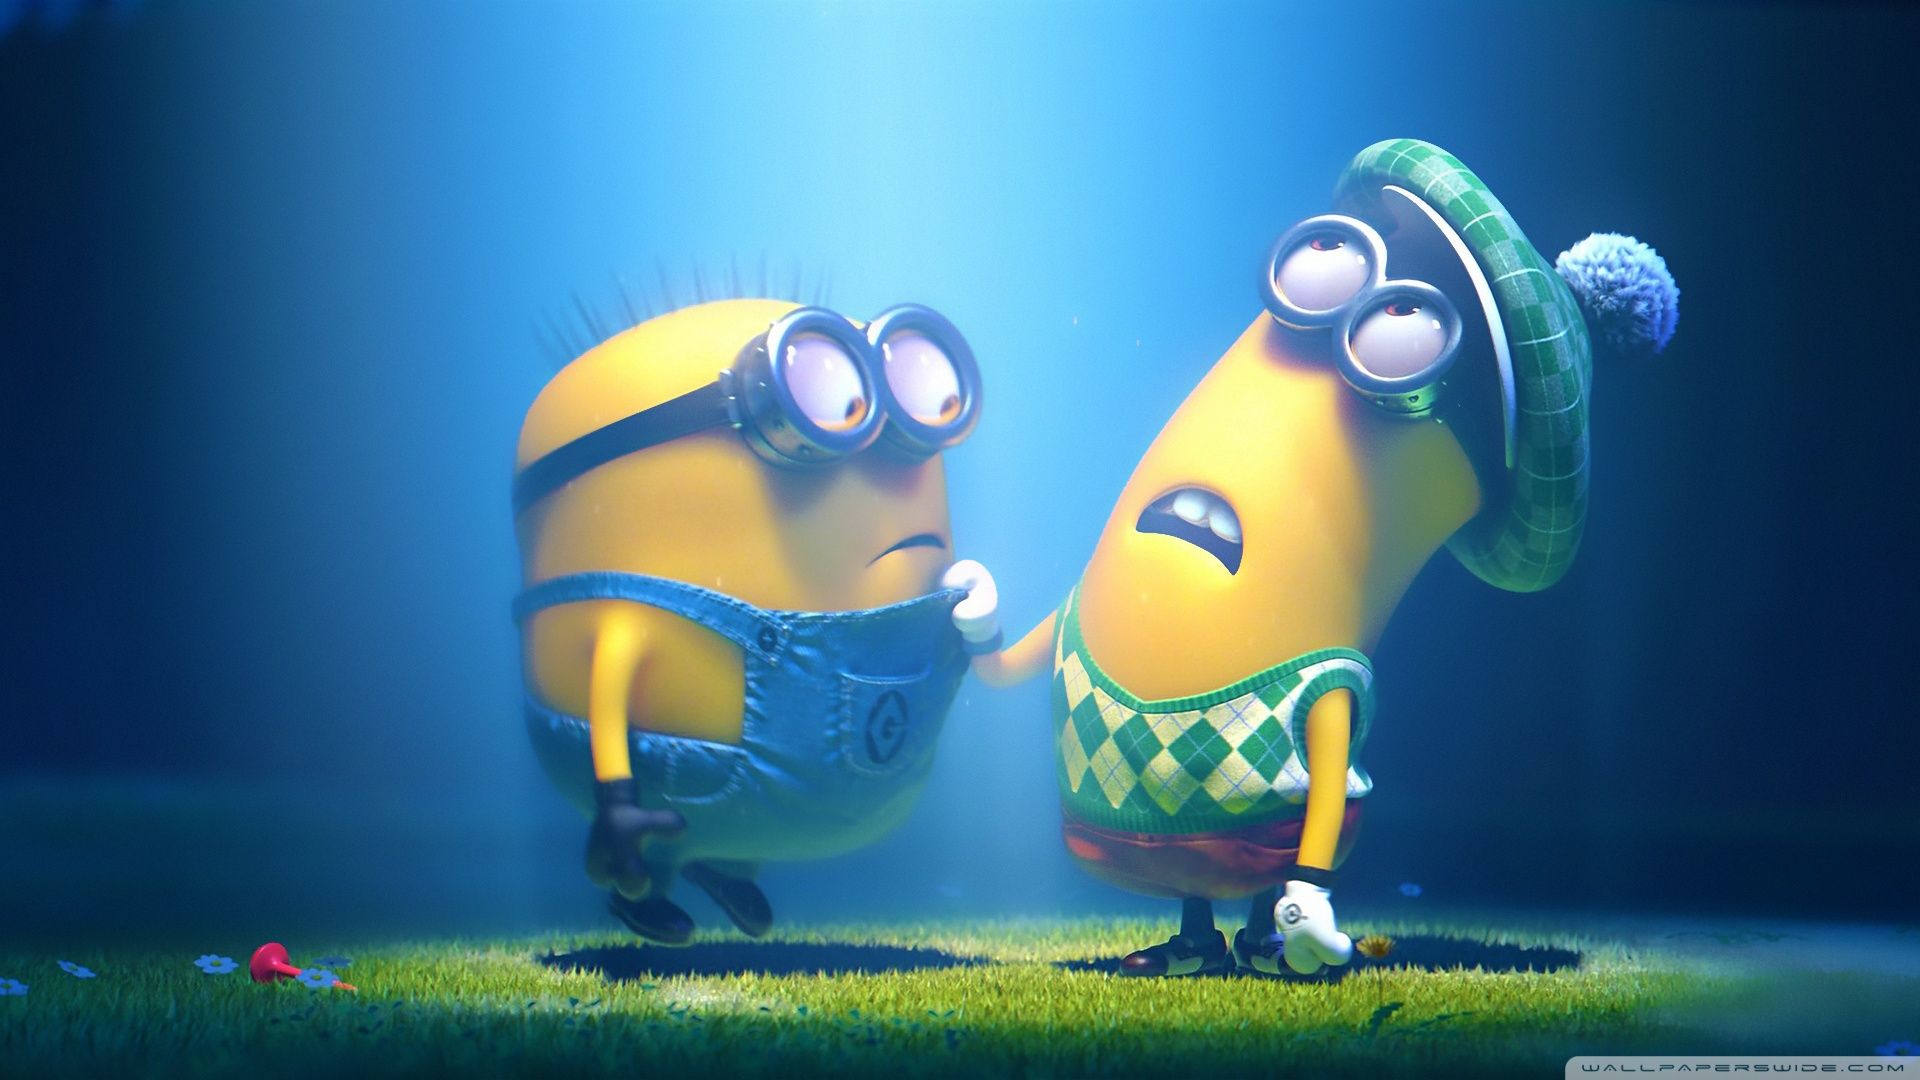 Despicable Me 2 2013 Wallpaper Full HD [1920x1080] - Free ...